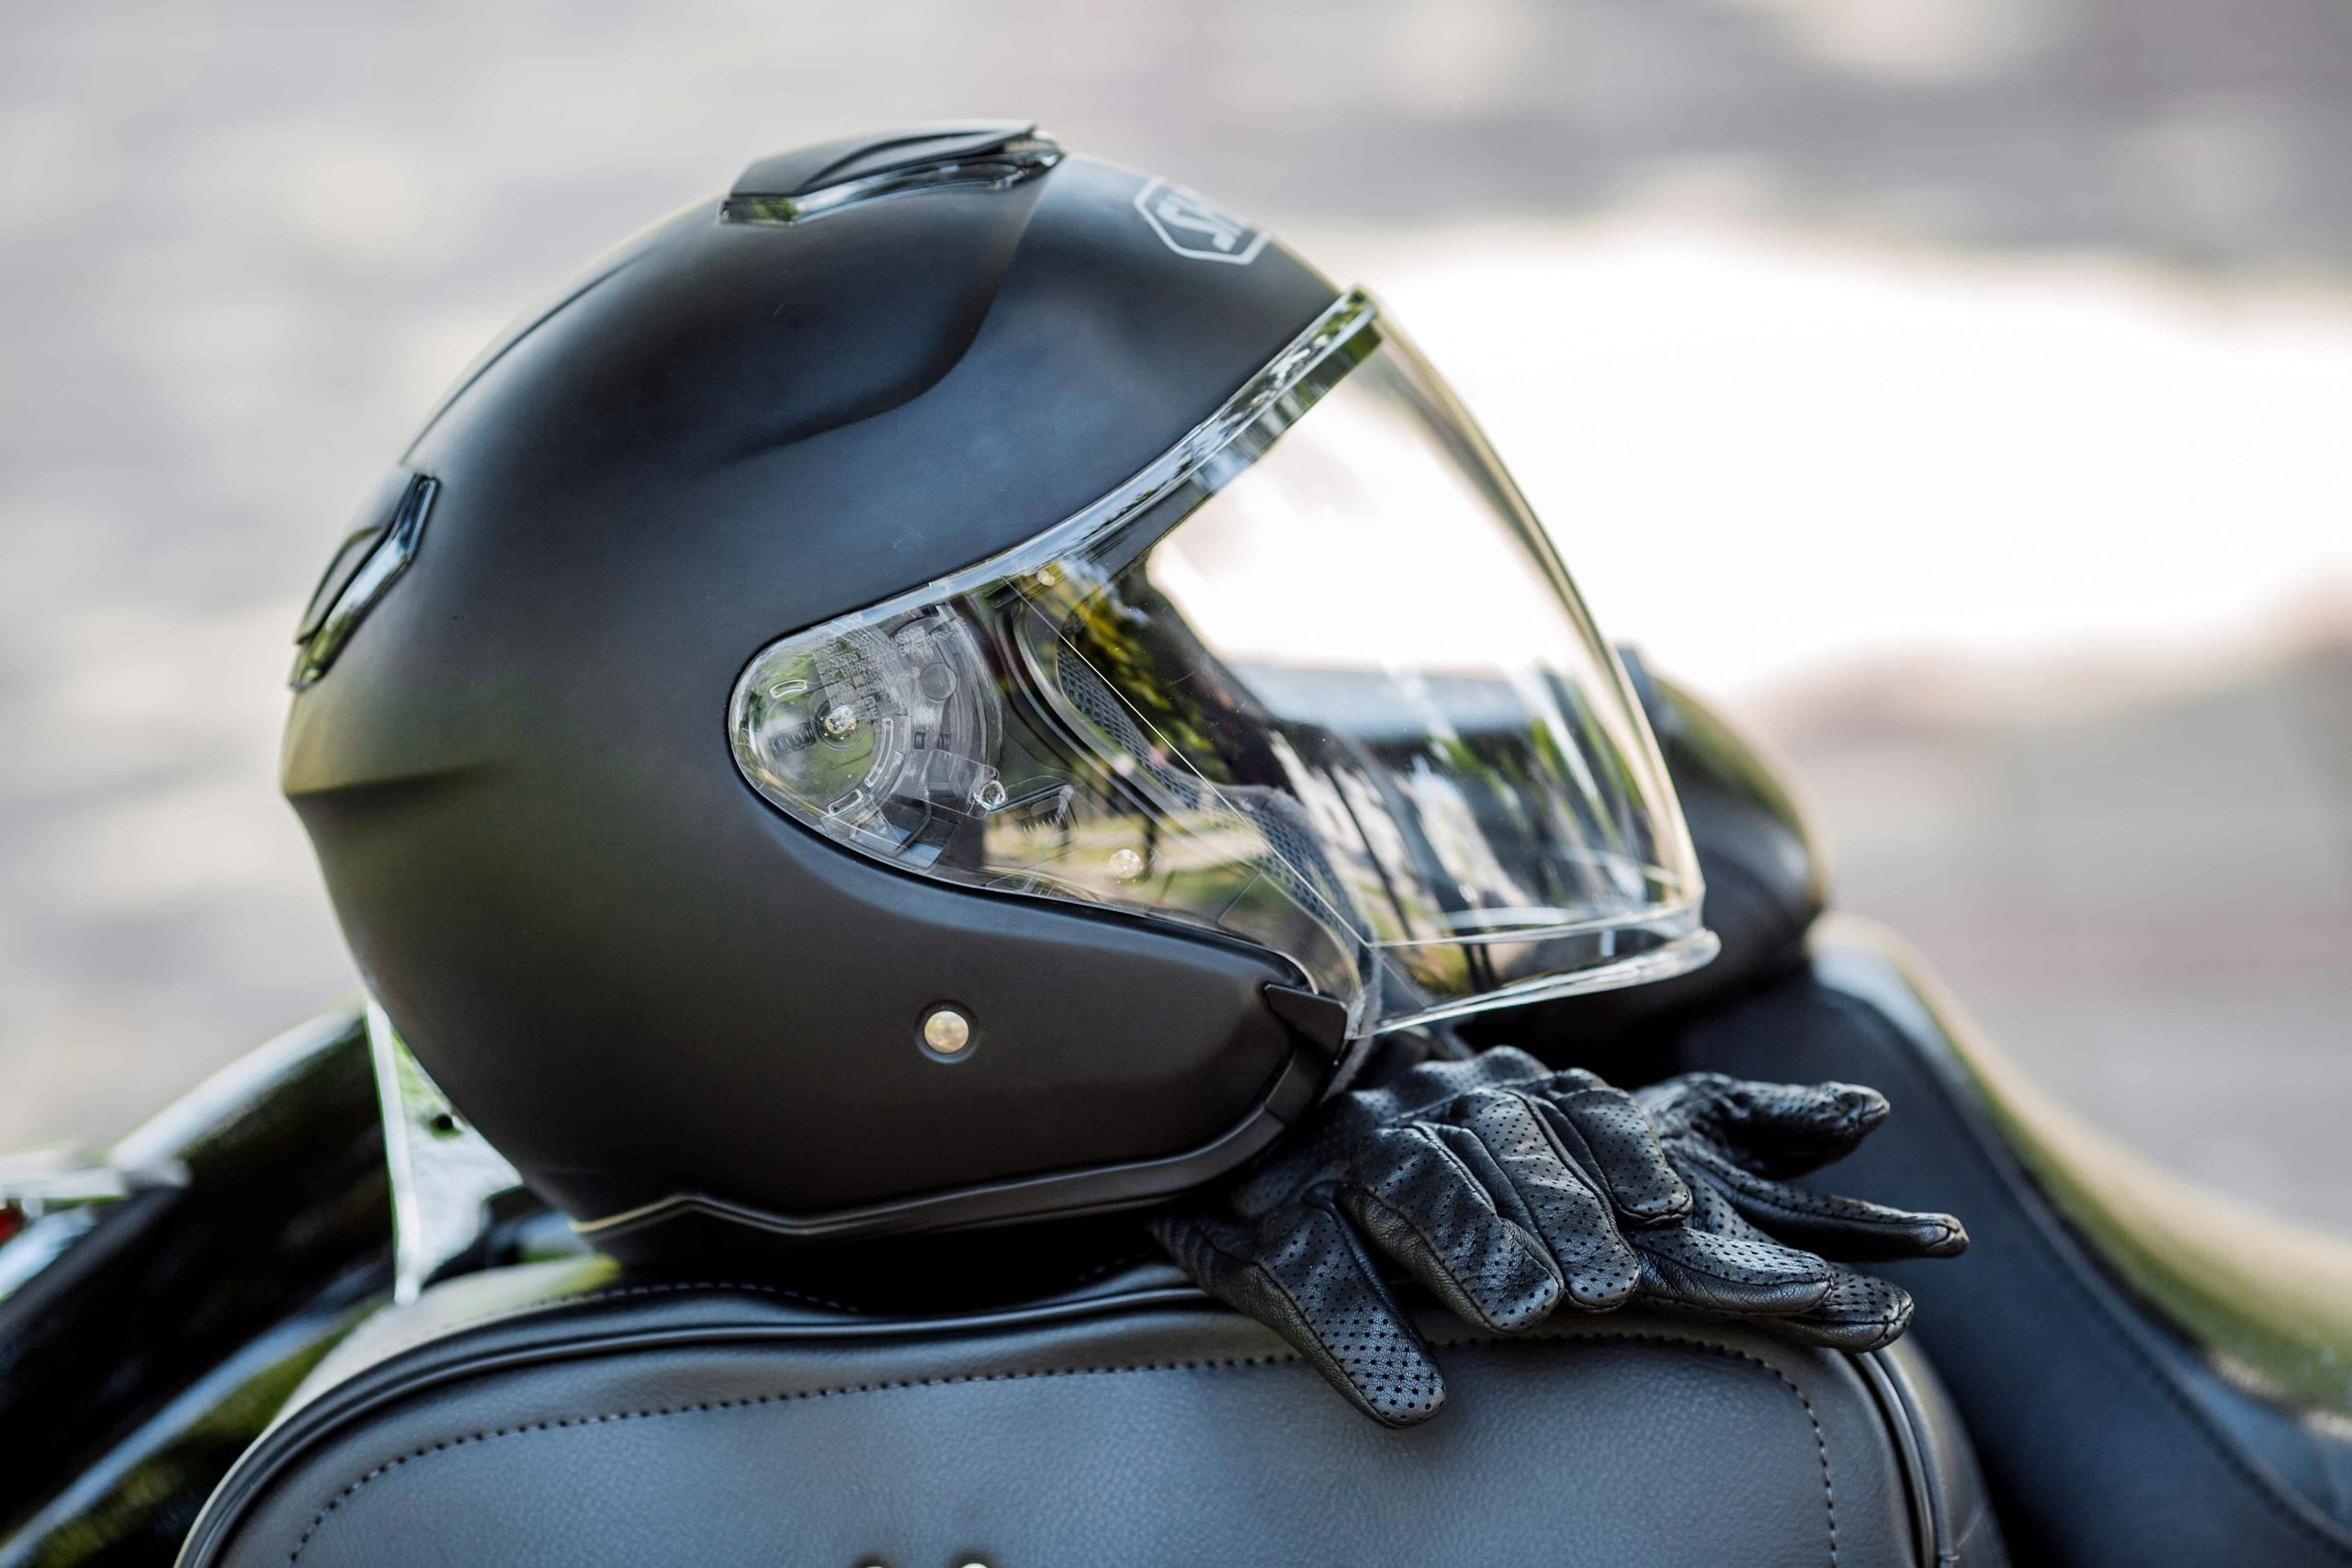 Motorcycle gear on top of a black leather bag